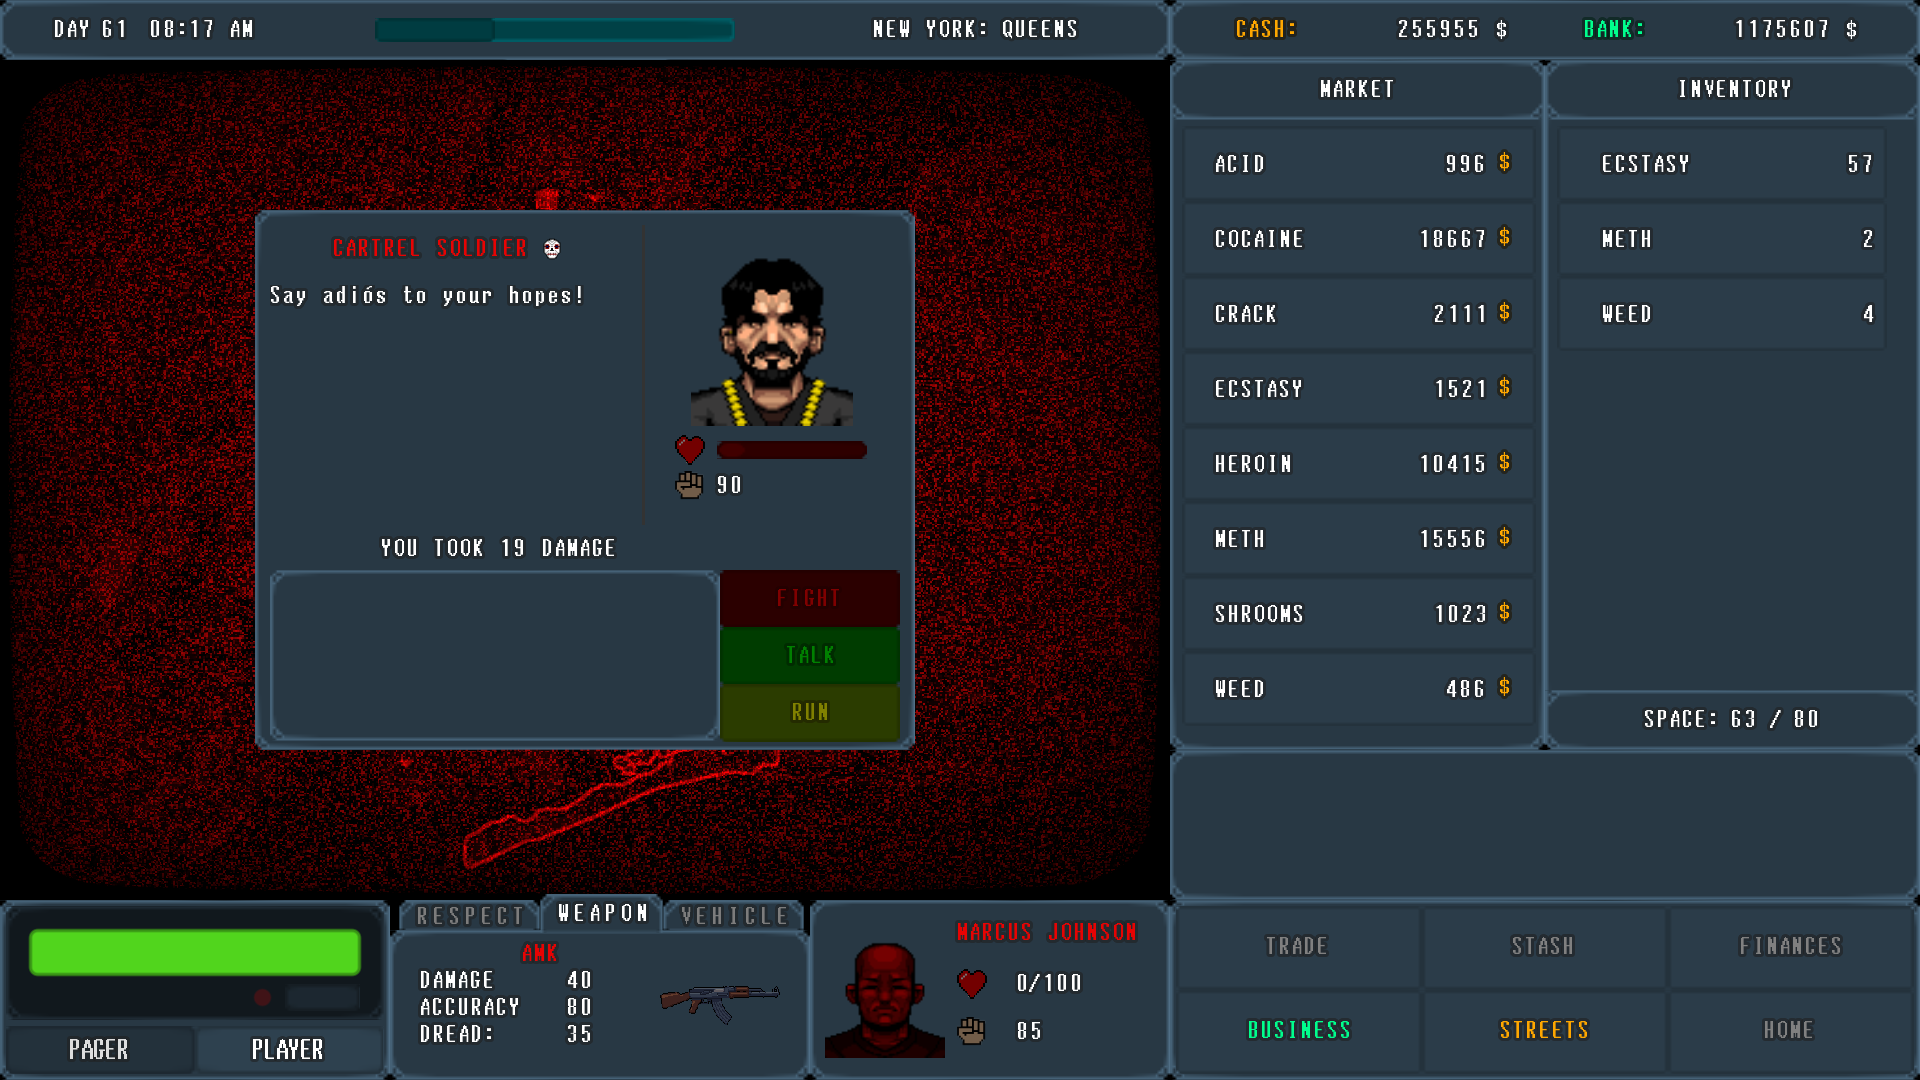 Screenshoot of game PUSHER - DRUG TYCOON showing Cartel Solider defending the Player